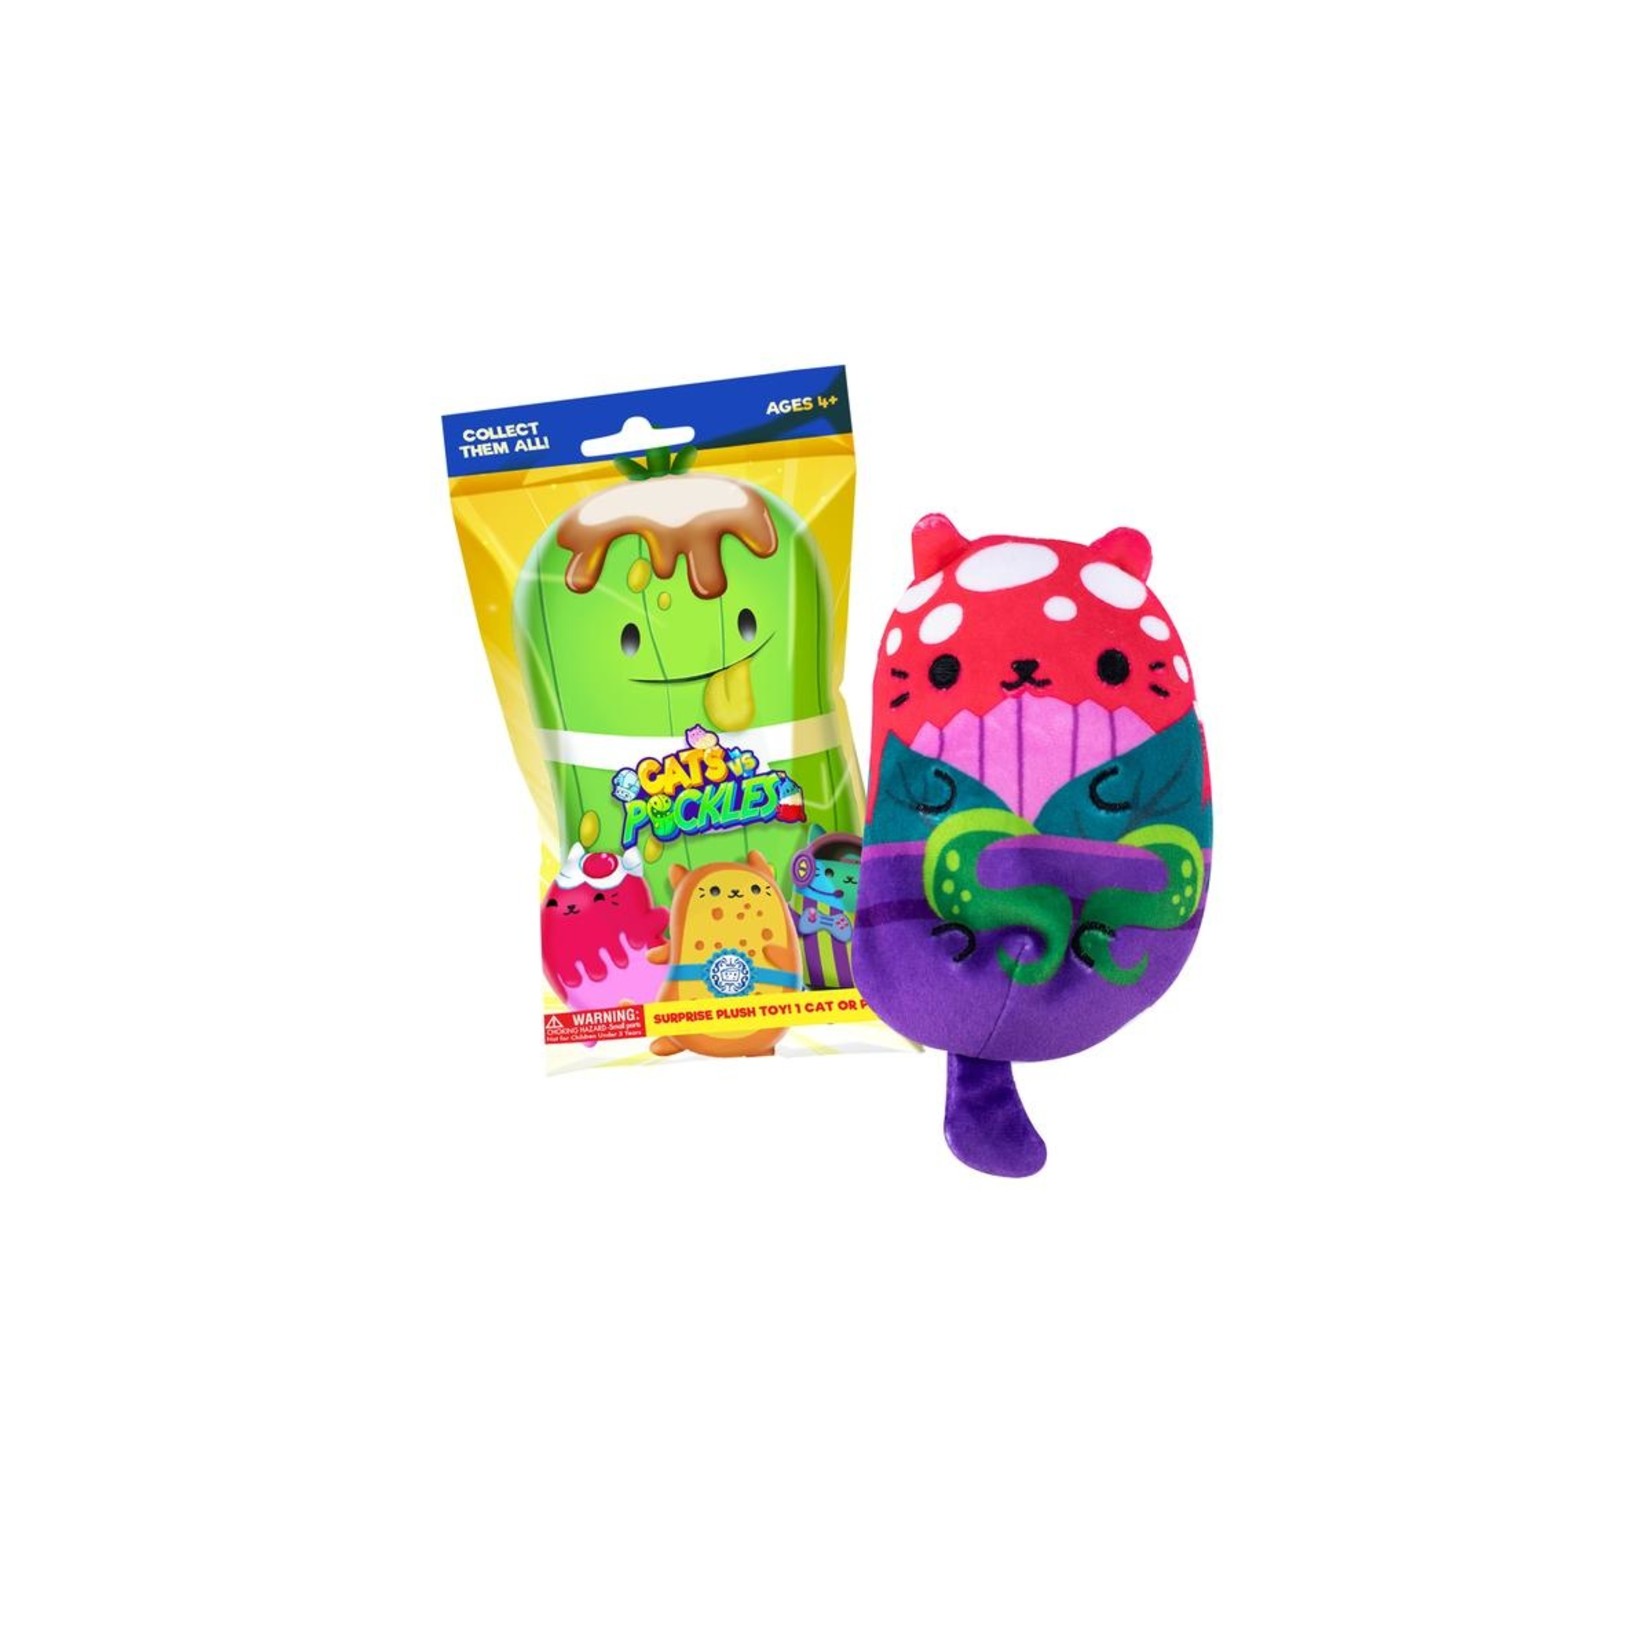 Cats vs Pickles EXCLUSIVE 4 Inch Plush Mystery Bag